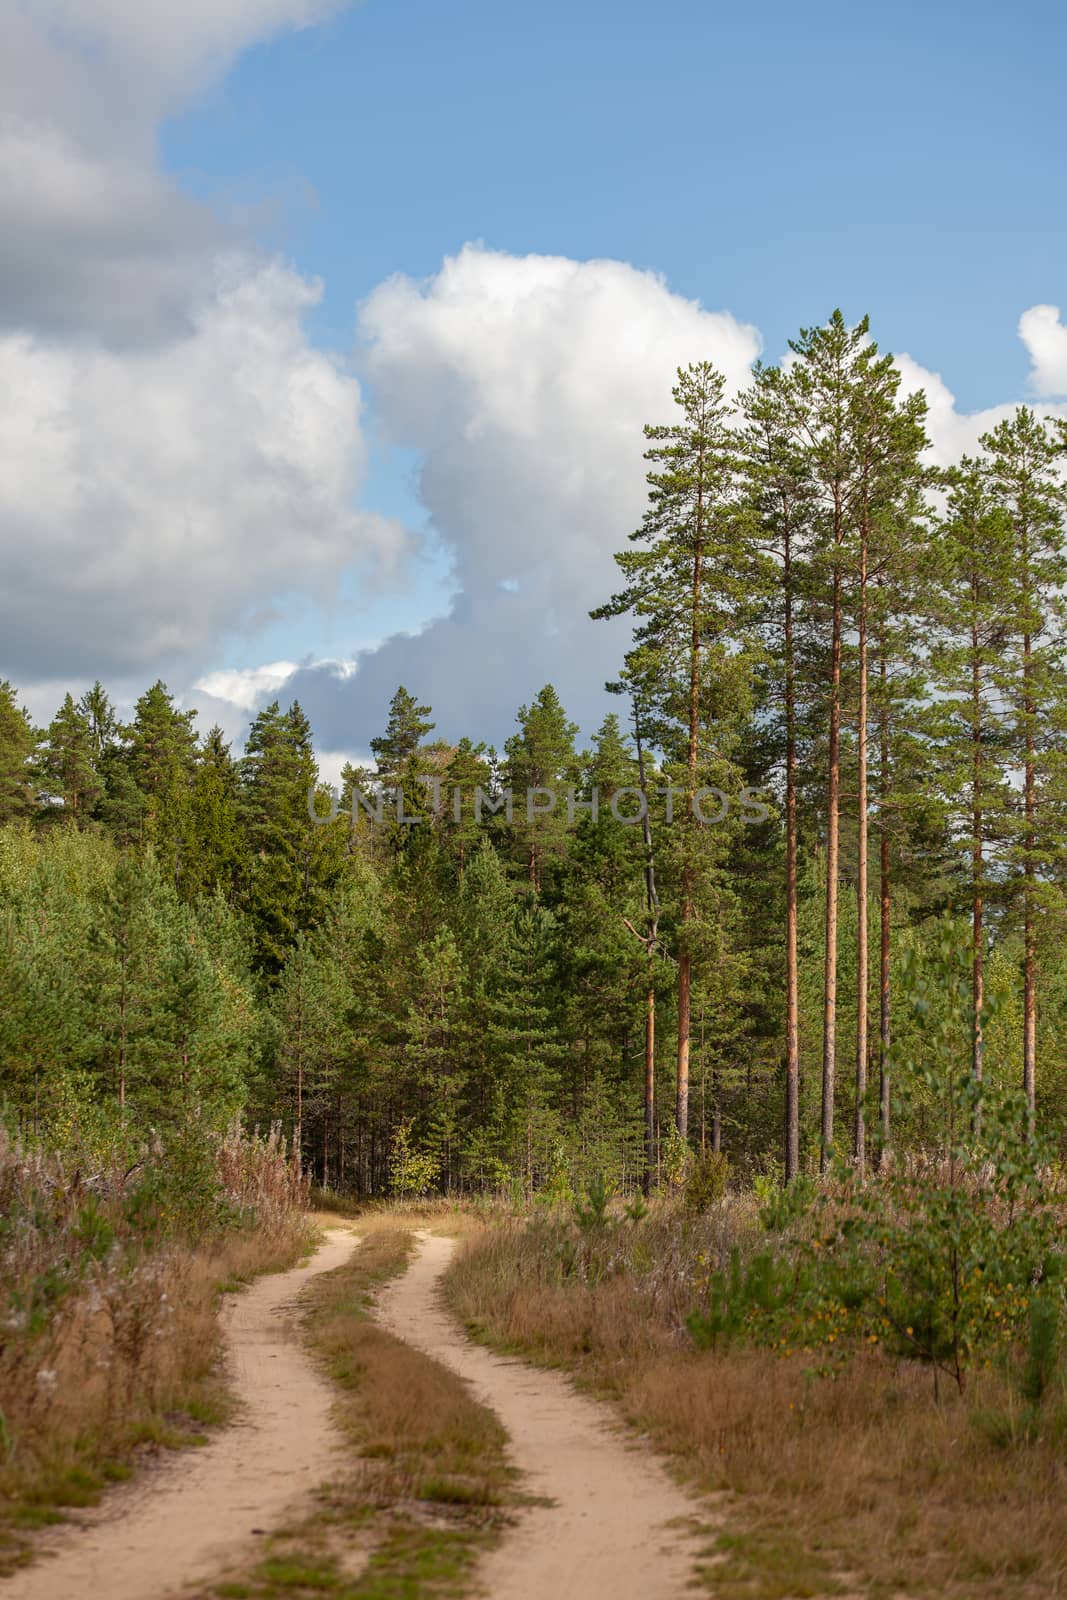 Pine forest and a sandy road by Angorius